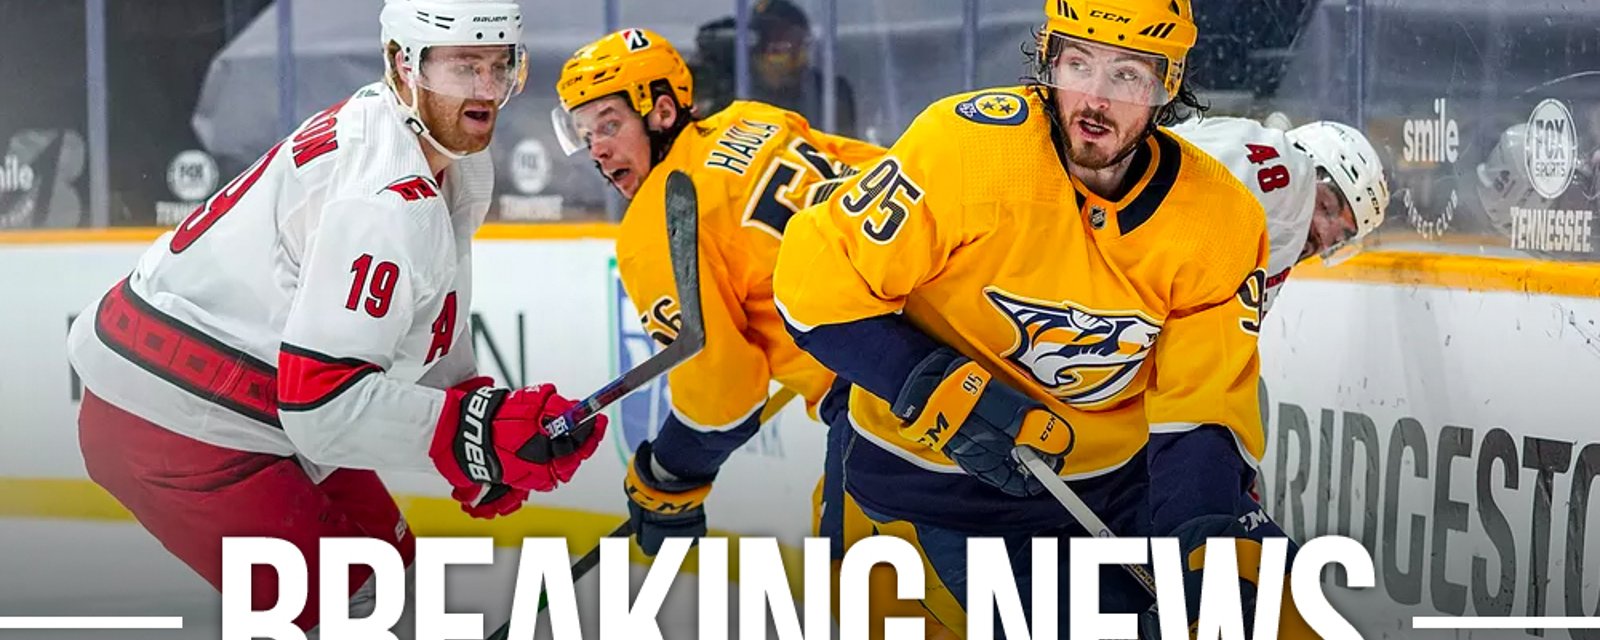 Tonight's game between Preds and Hurricanes reportedly postponed due to exposure event 